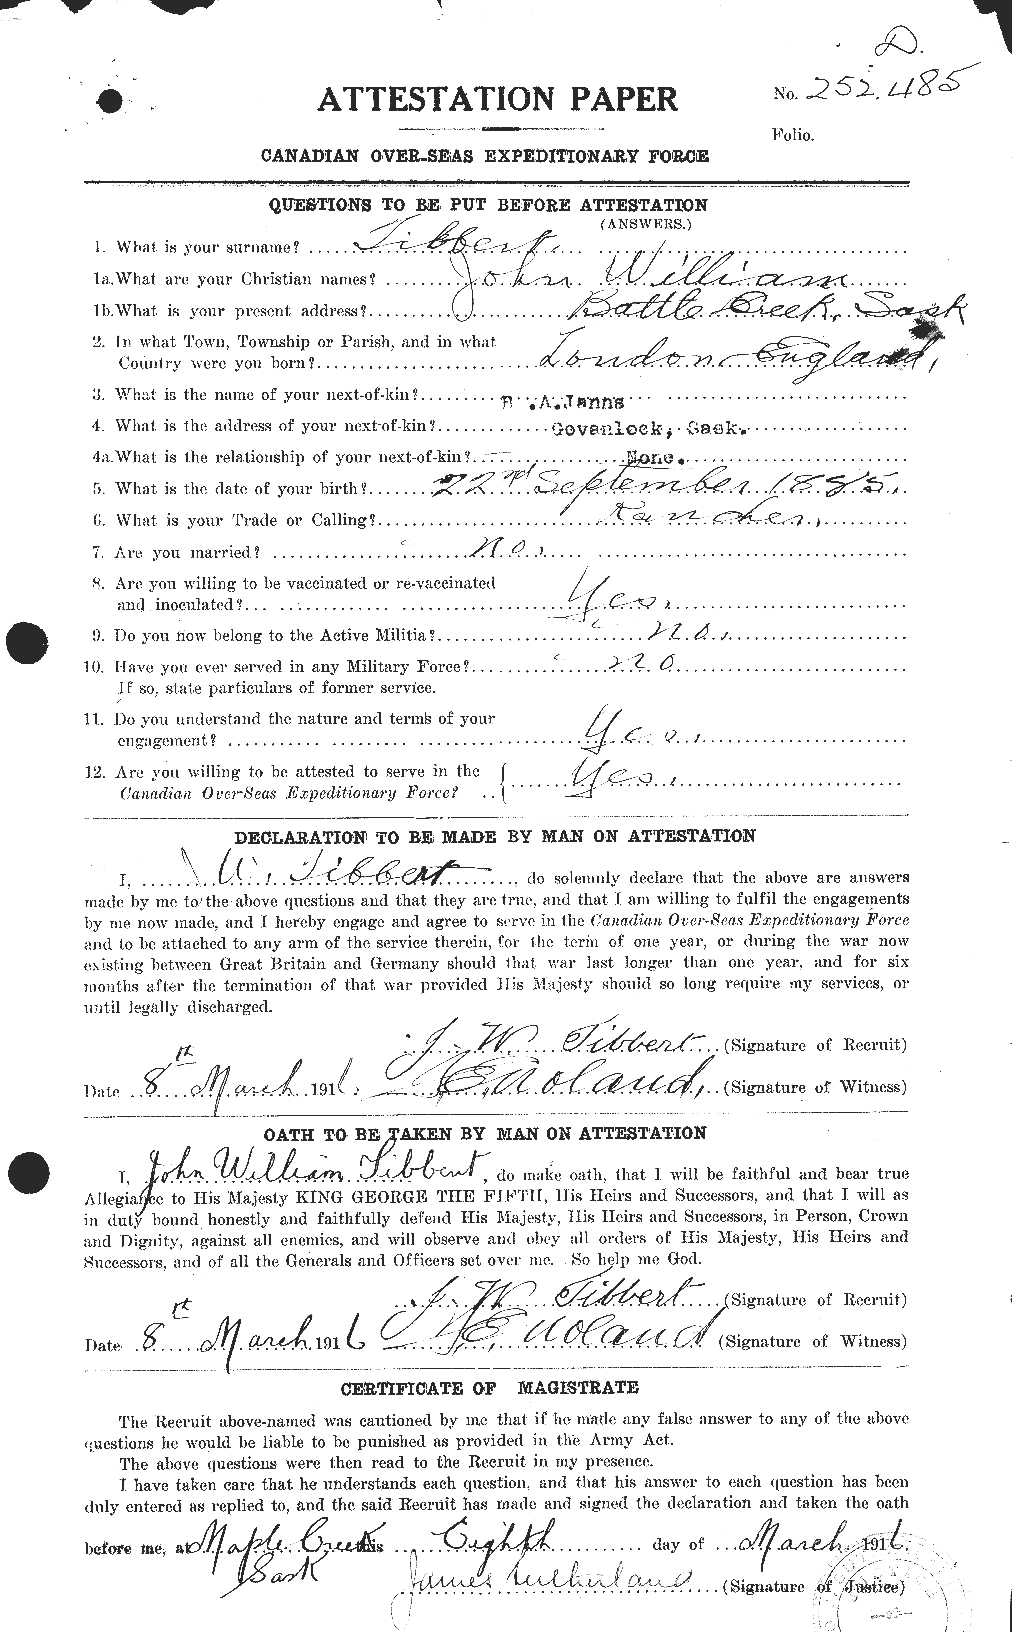 Personnel Records of the First World War - CEF 636502a